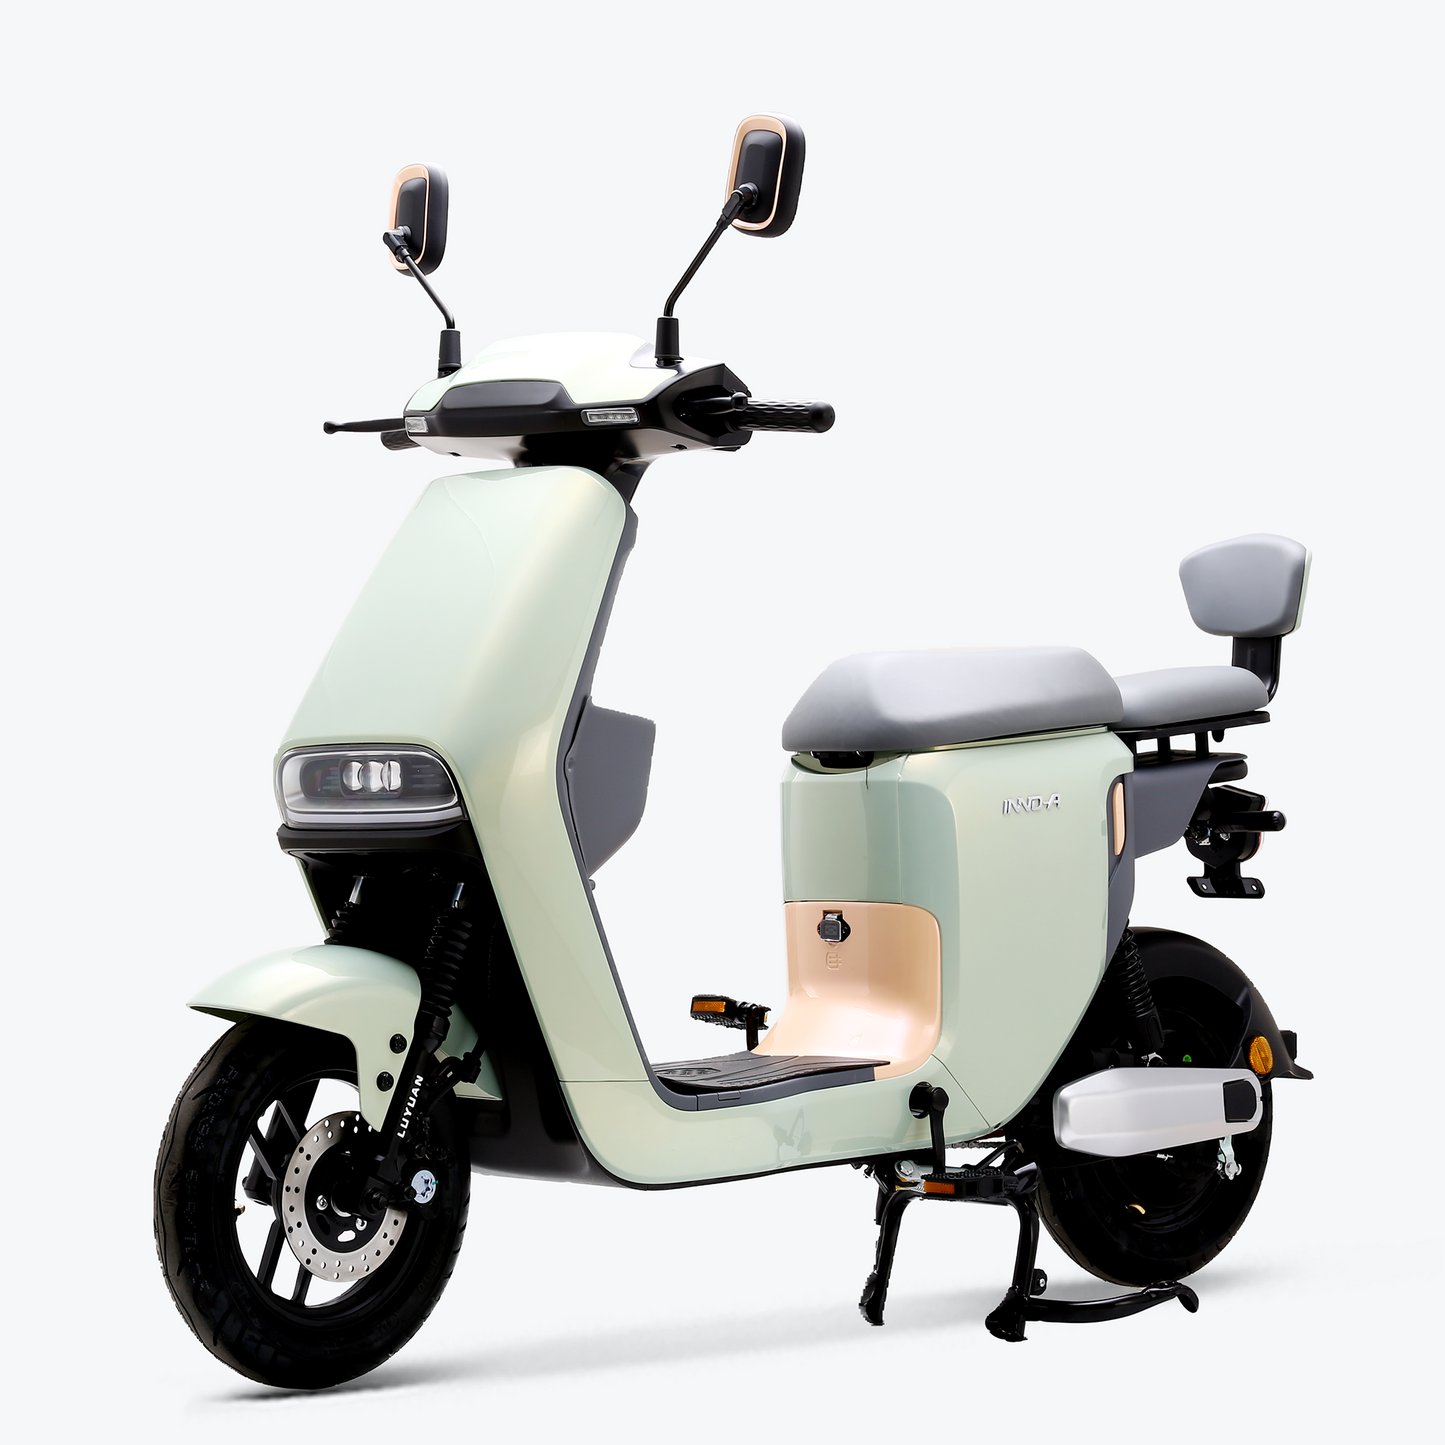 HMP Electric Scooter, The e-Moped that goes the extra mile – HMP Bikes